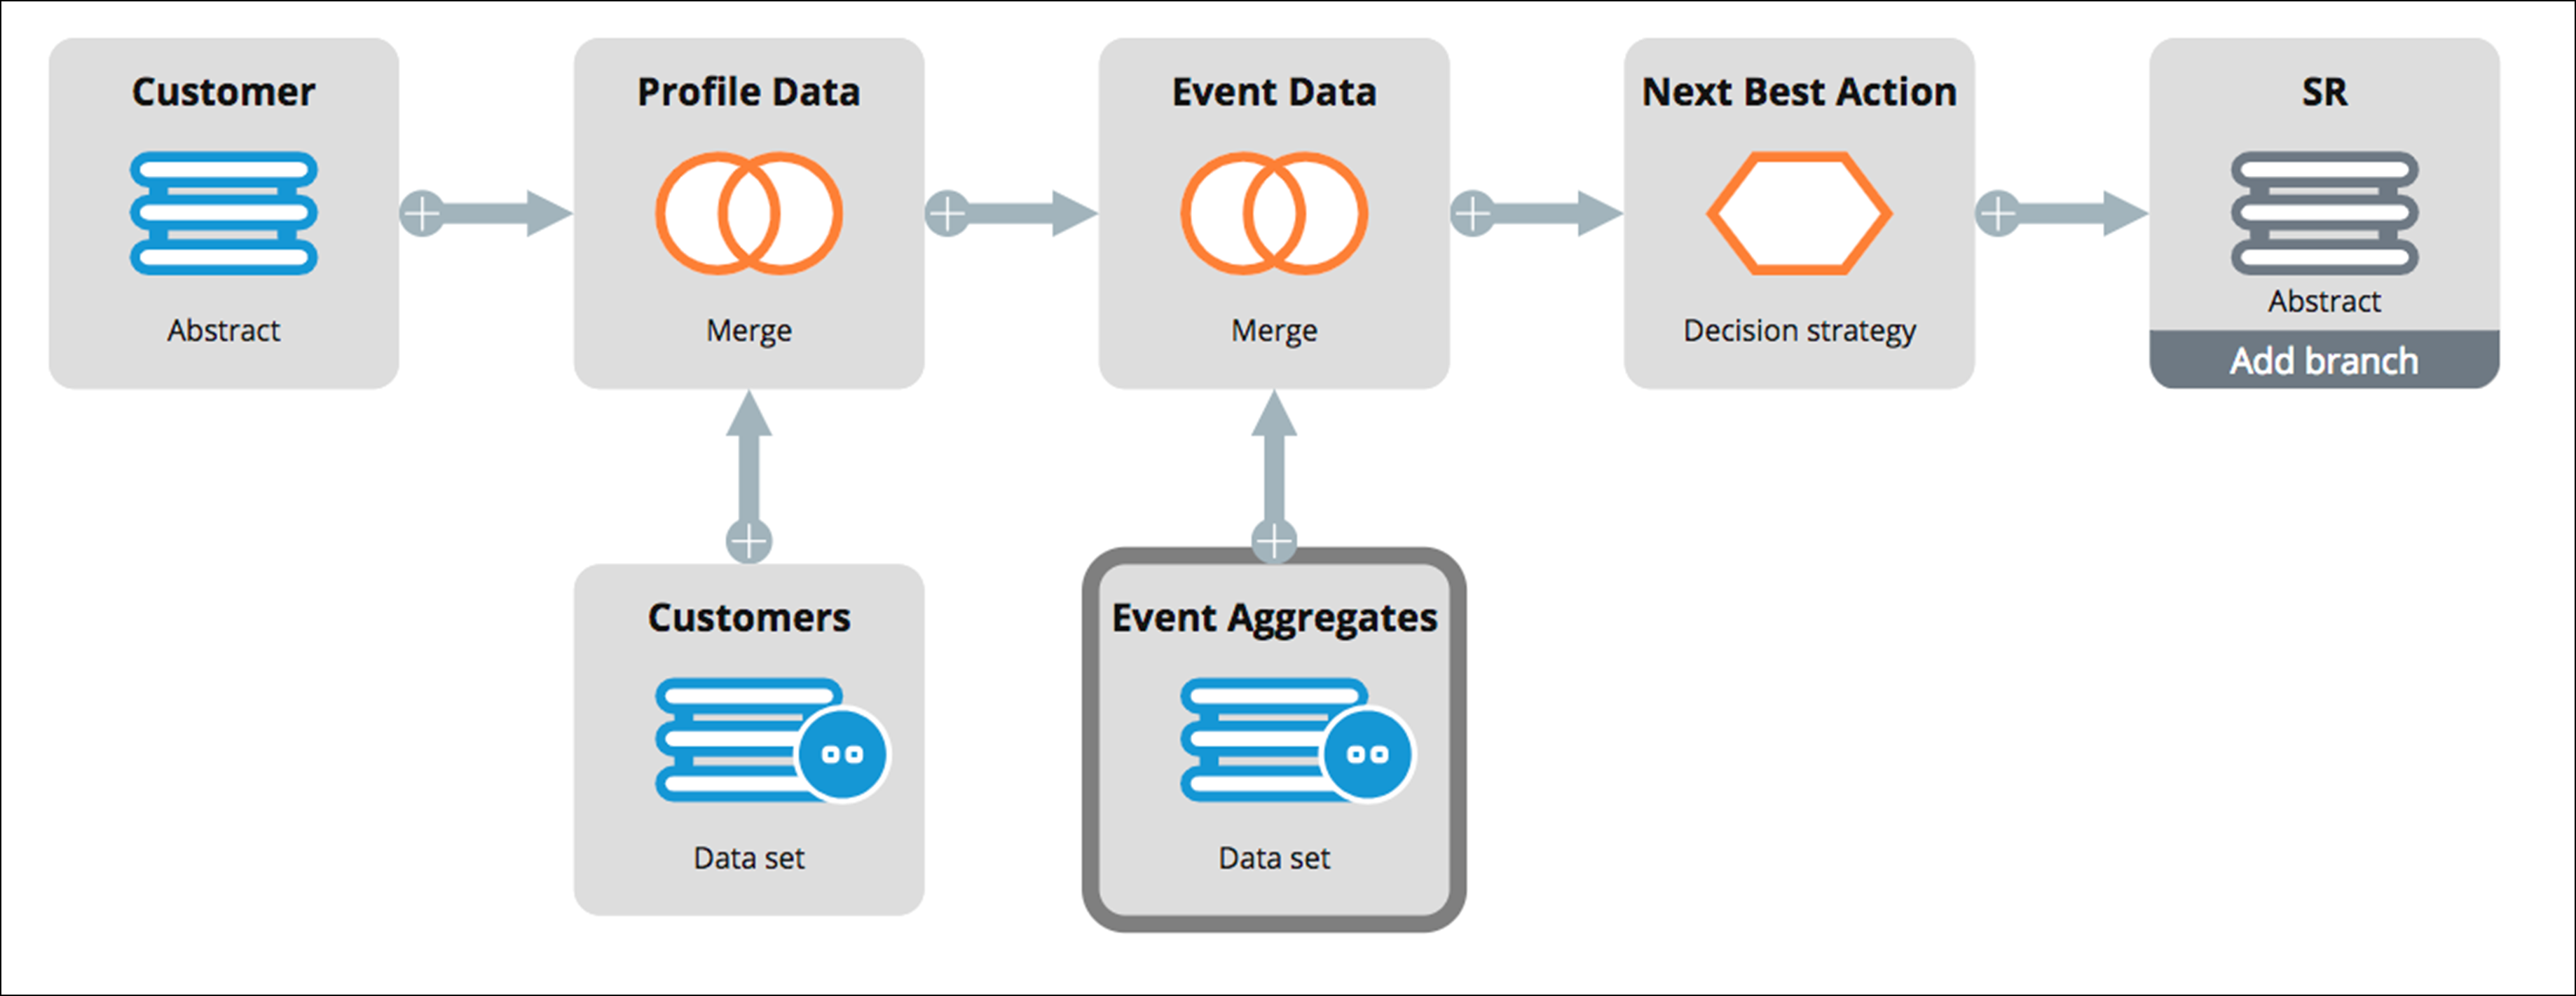 The diagram shows the Event Aggregates data set connected to an Event Data merge shape in a decision strategy.